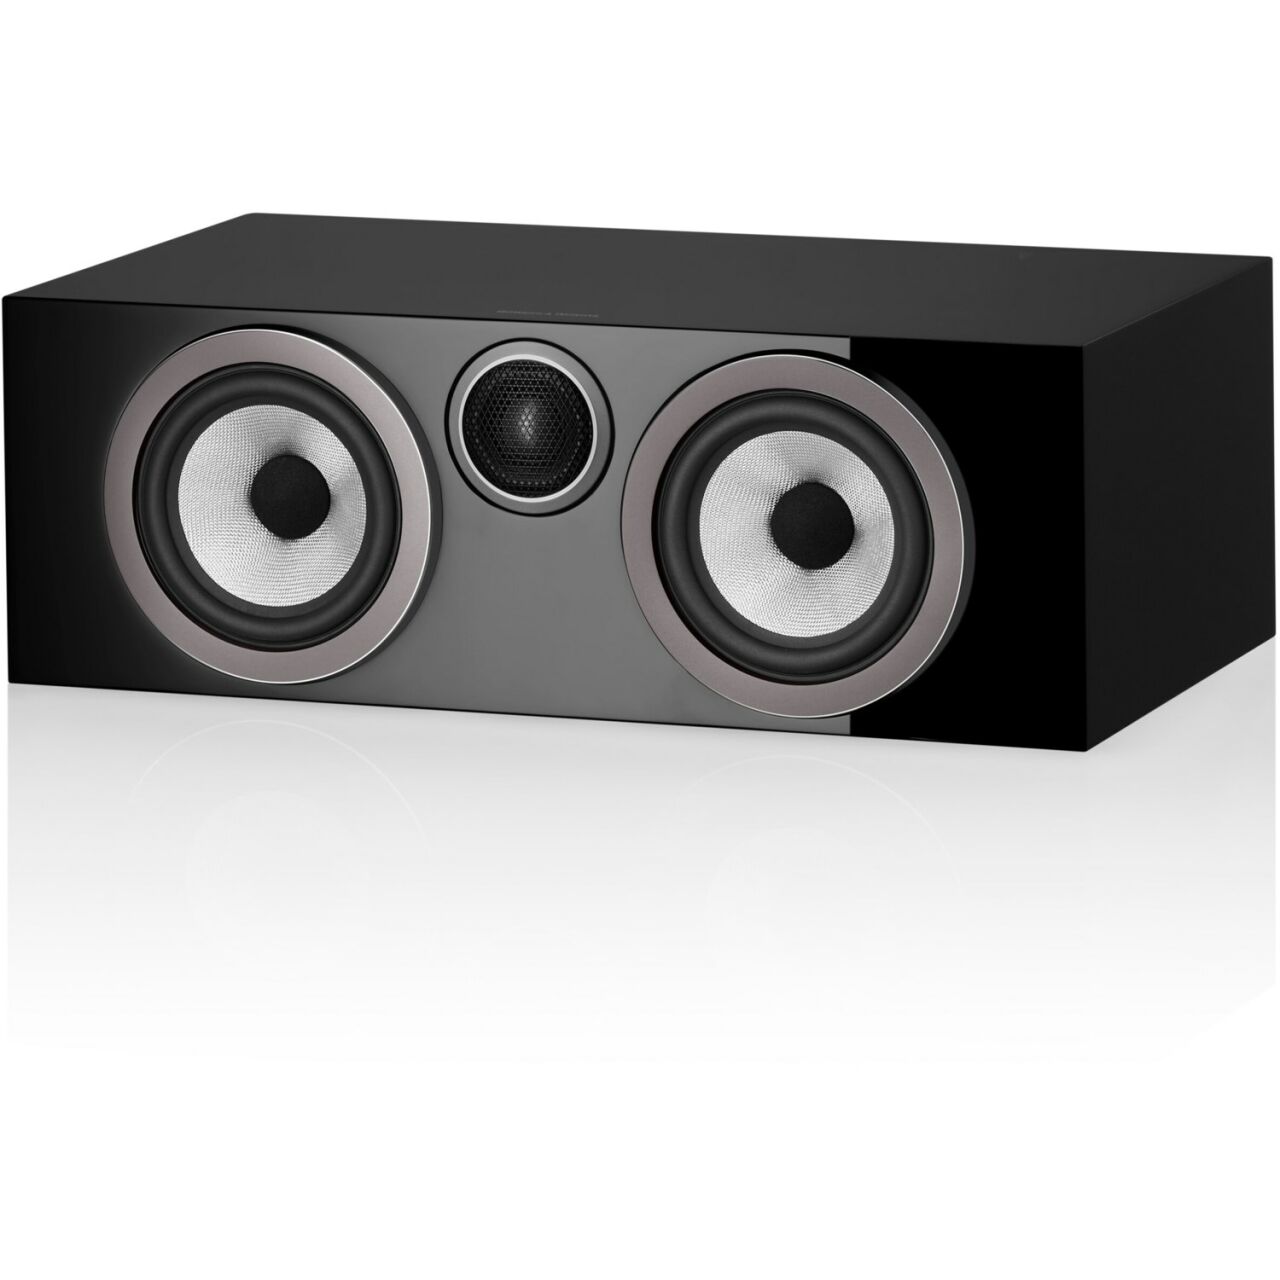 Bowers & Wilkins HTM 72 S3